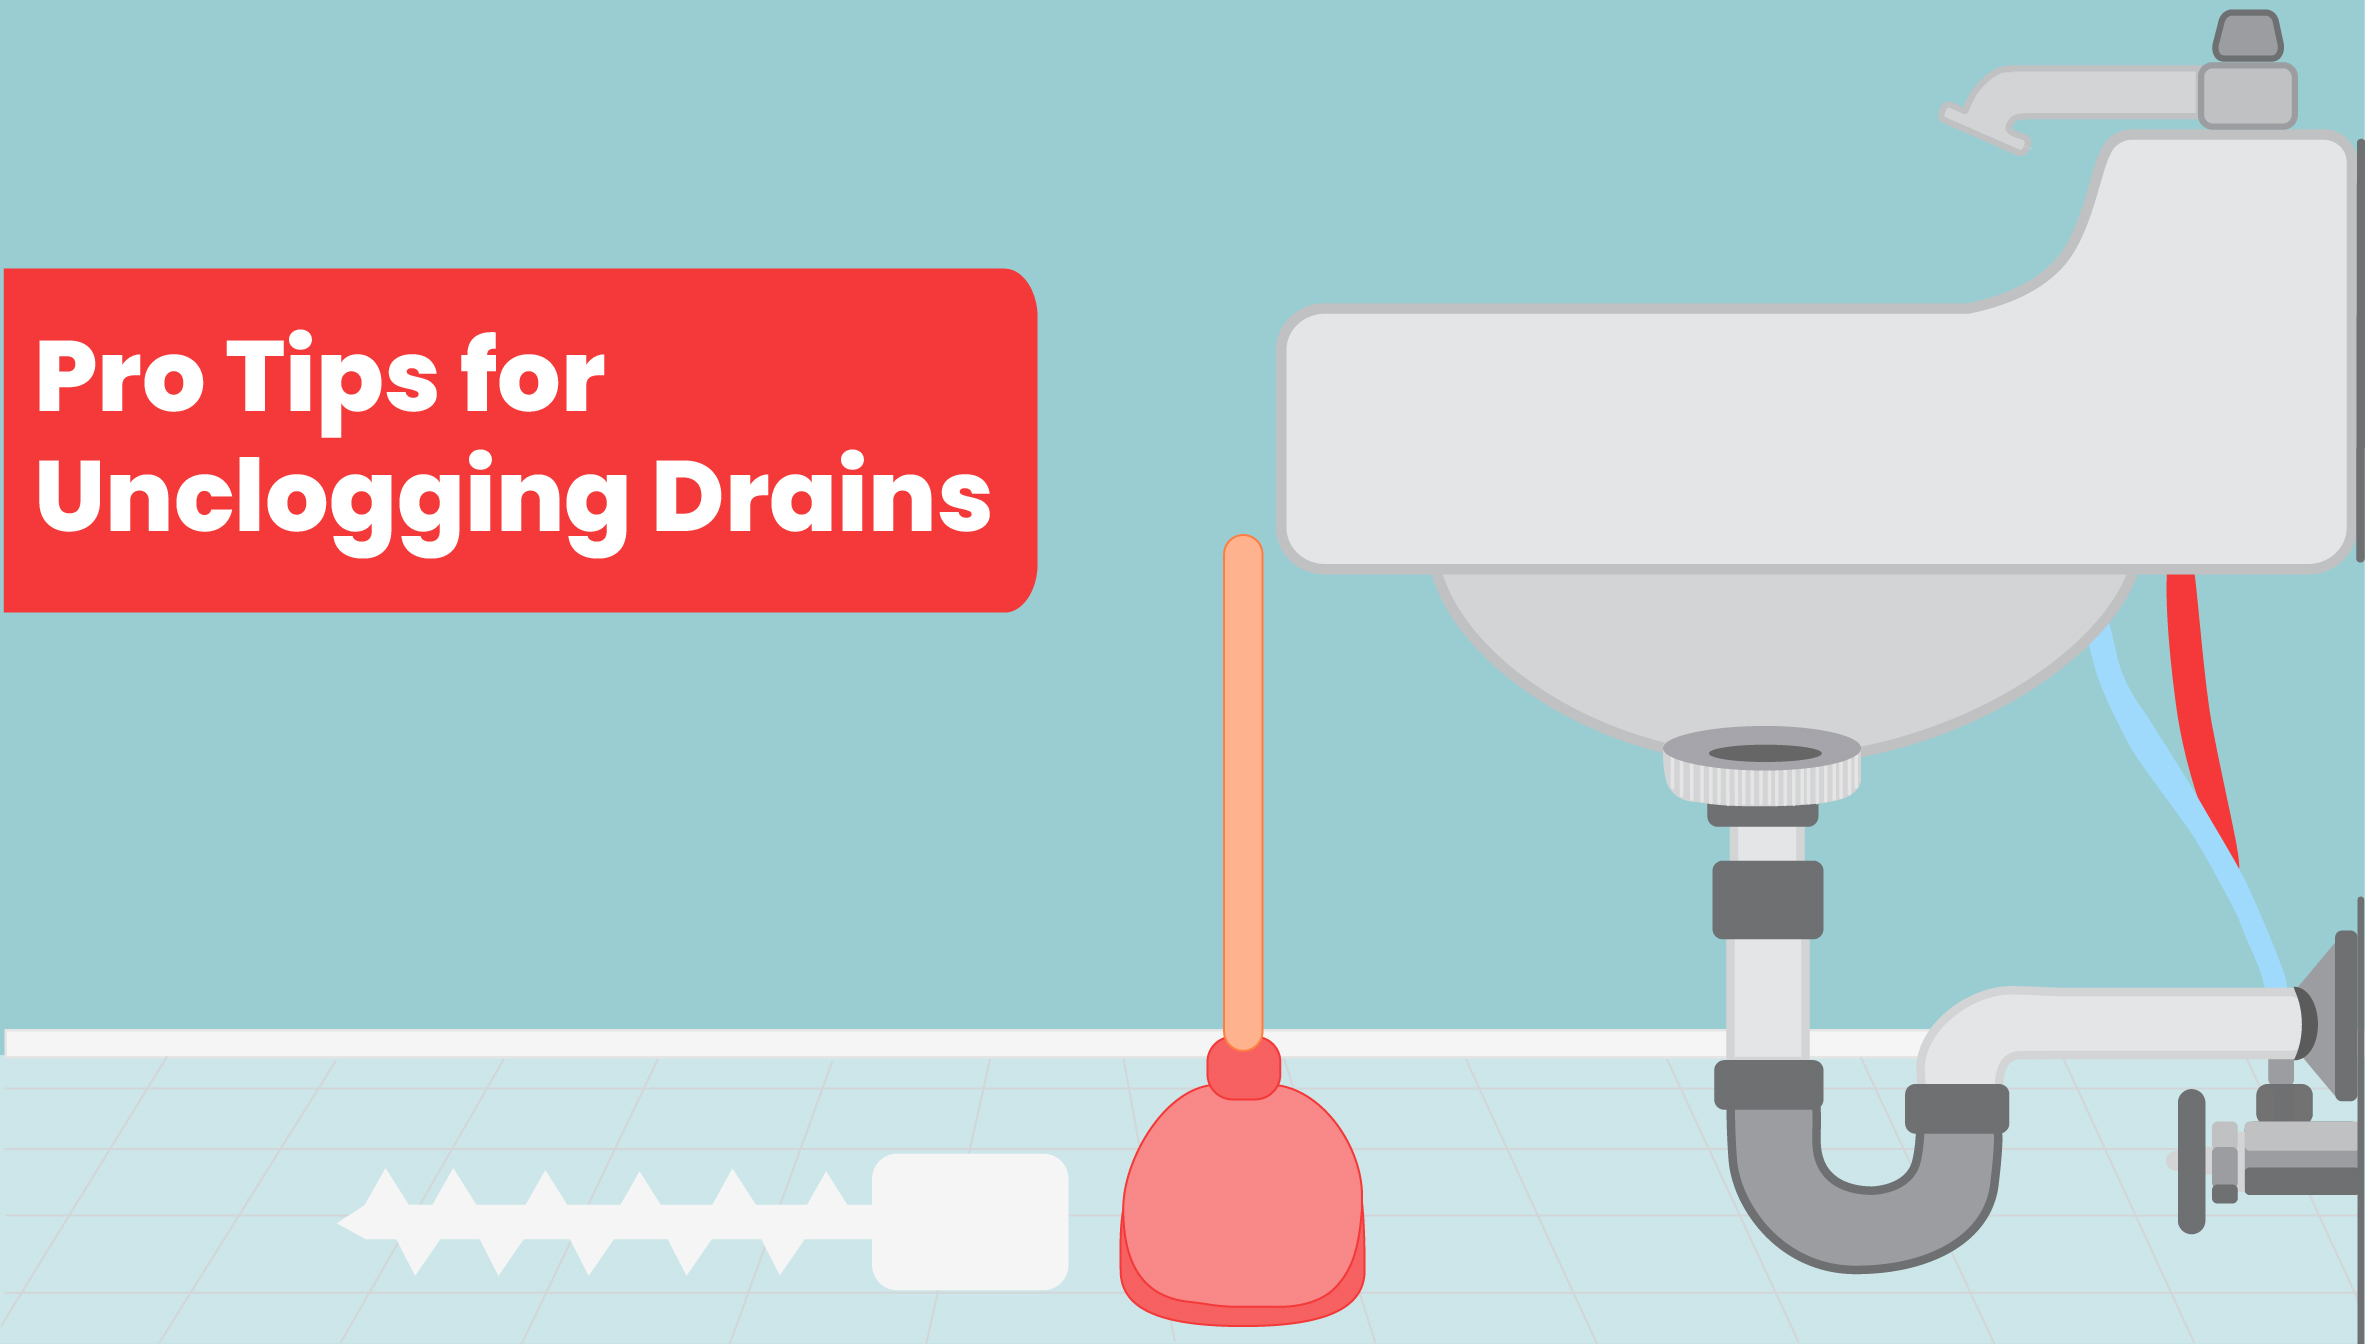 How Do You Unclog a Drain?